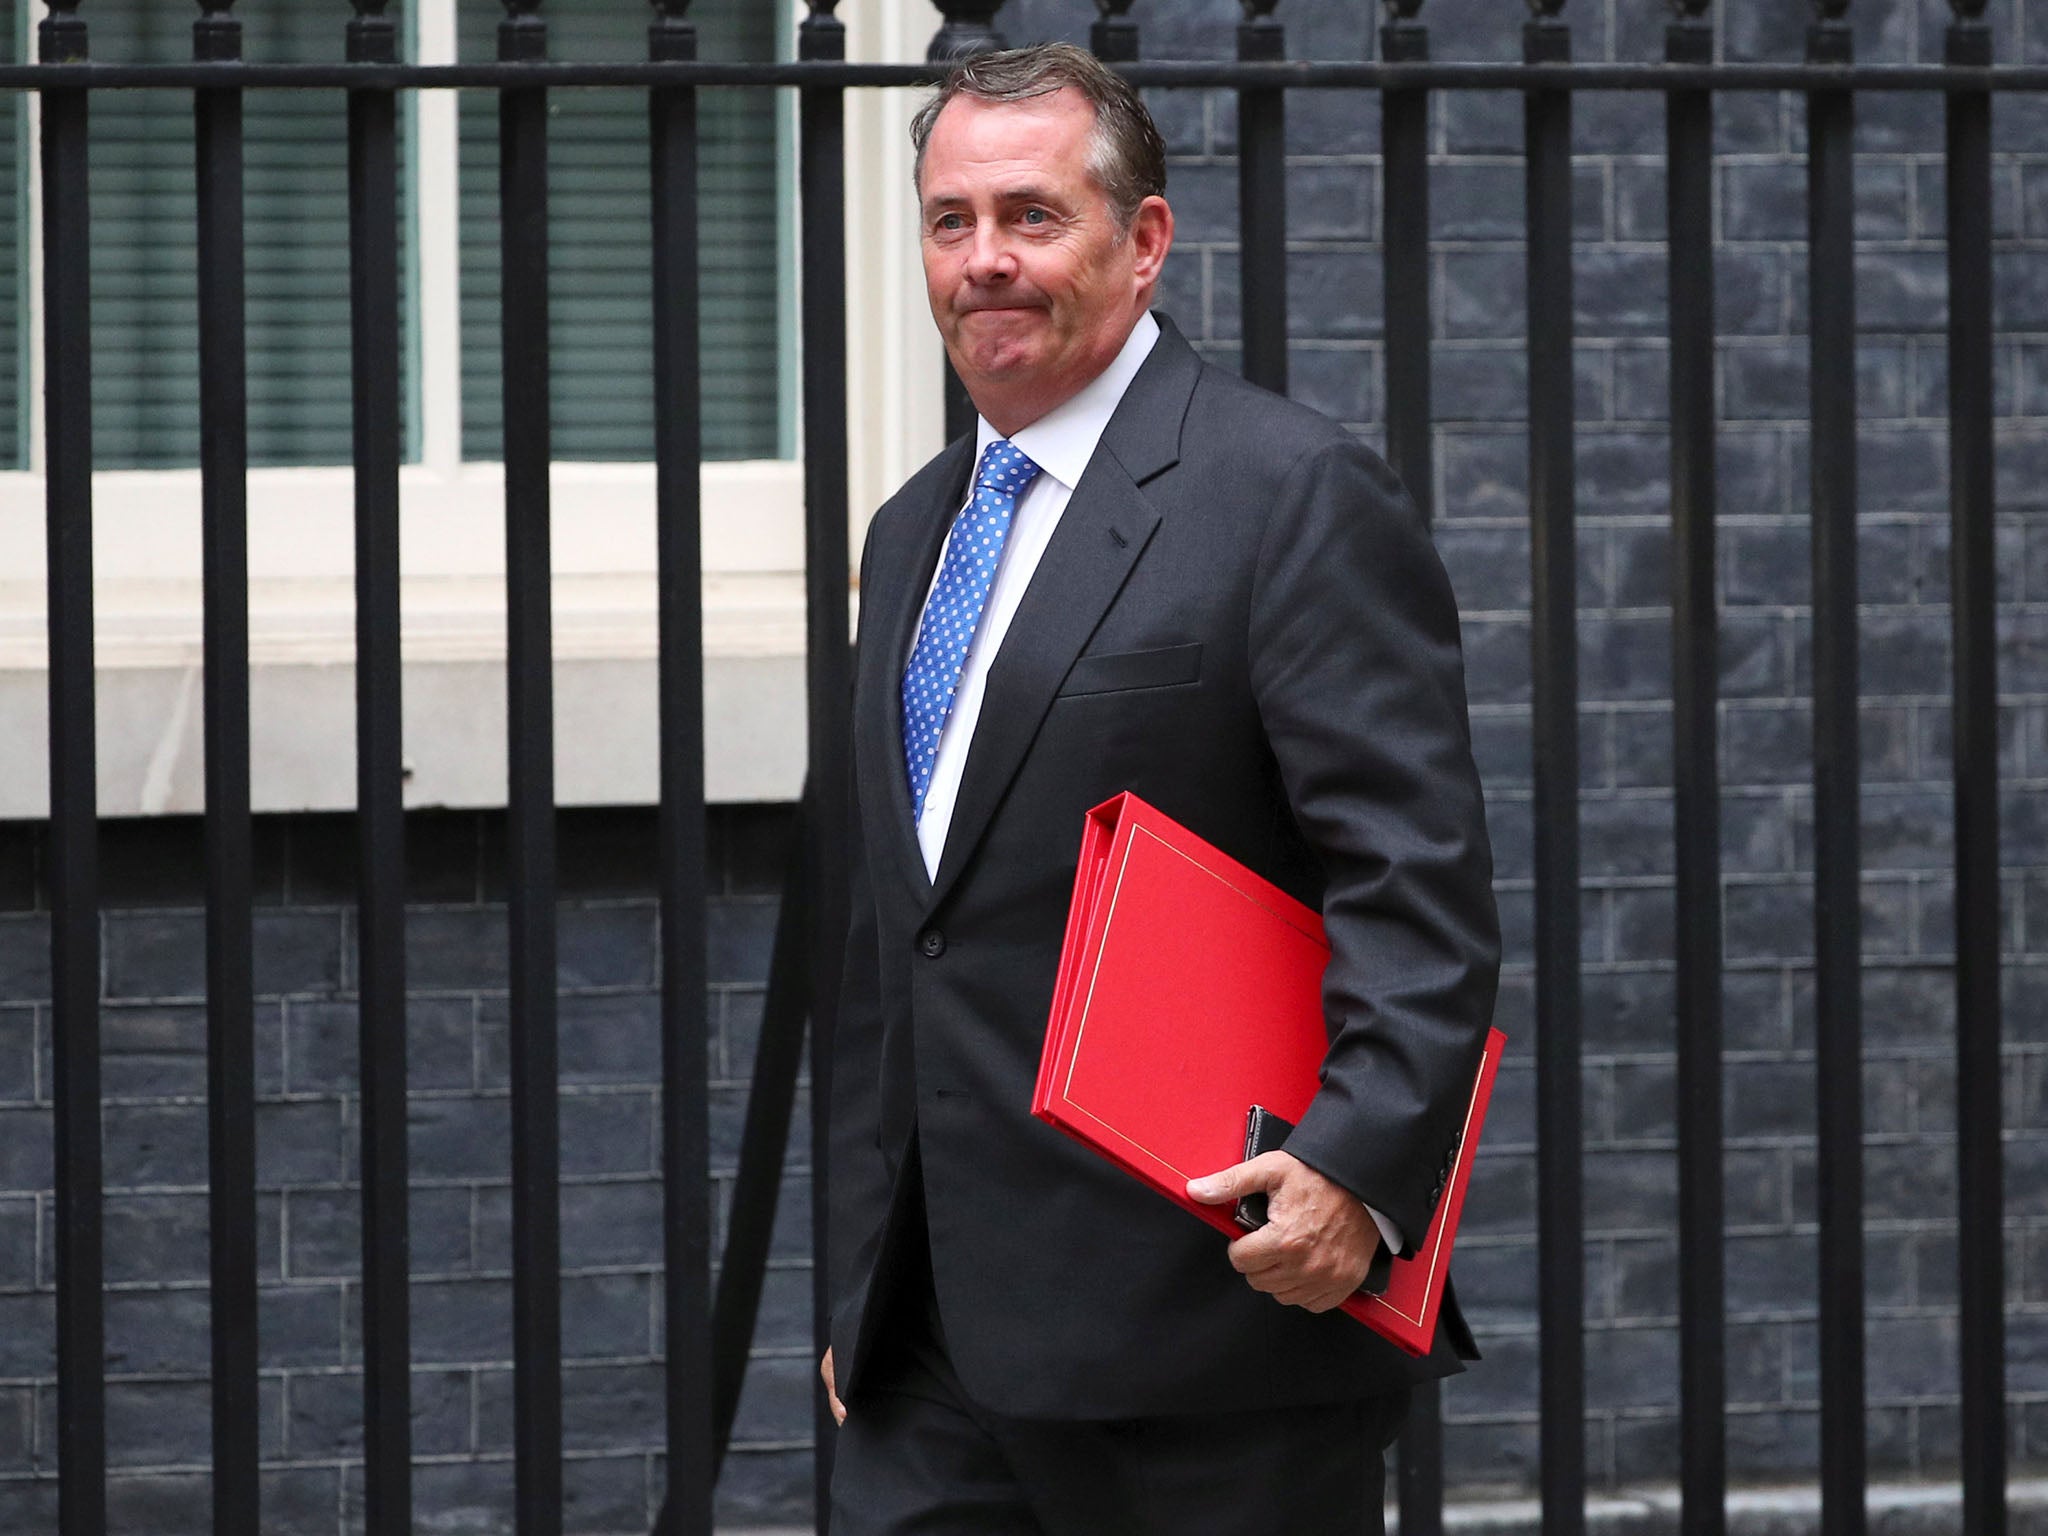 The EU (Withdrawal) Bill will allow deregulation similar to the US model – something that Liam Fox is in favour of